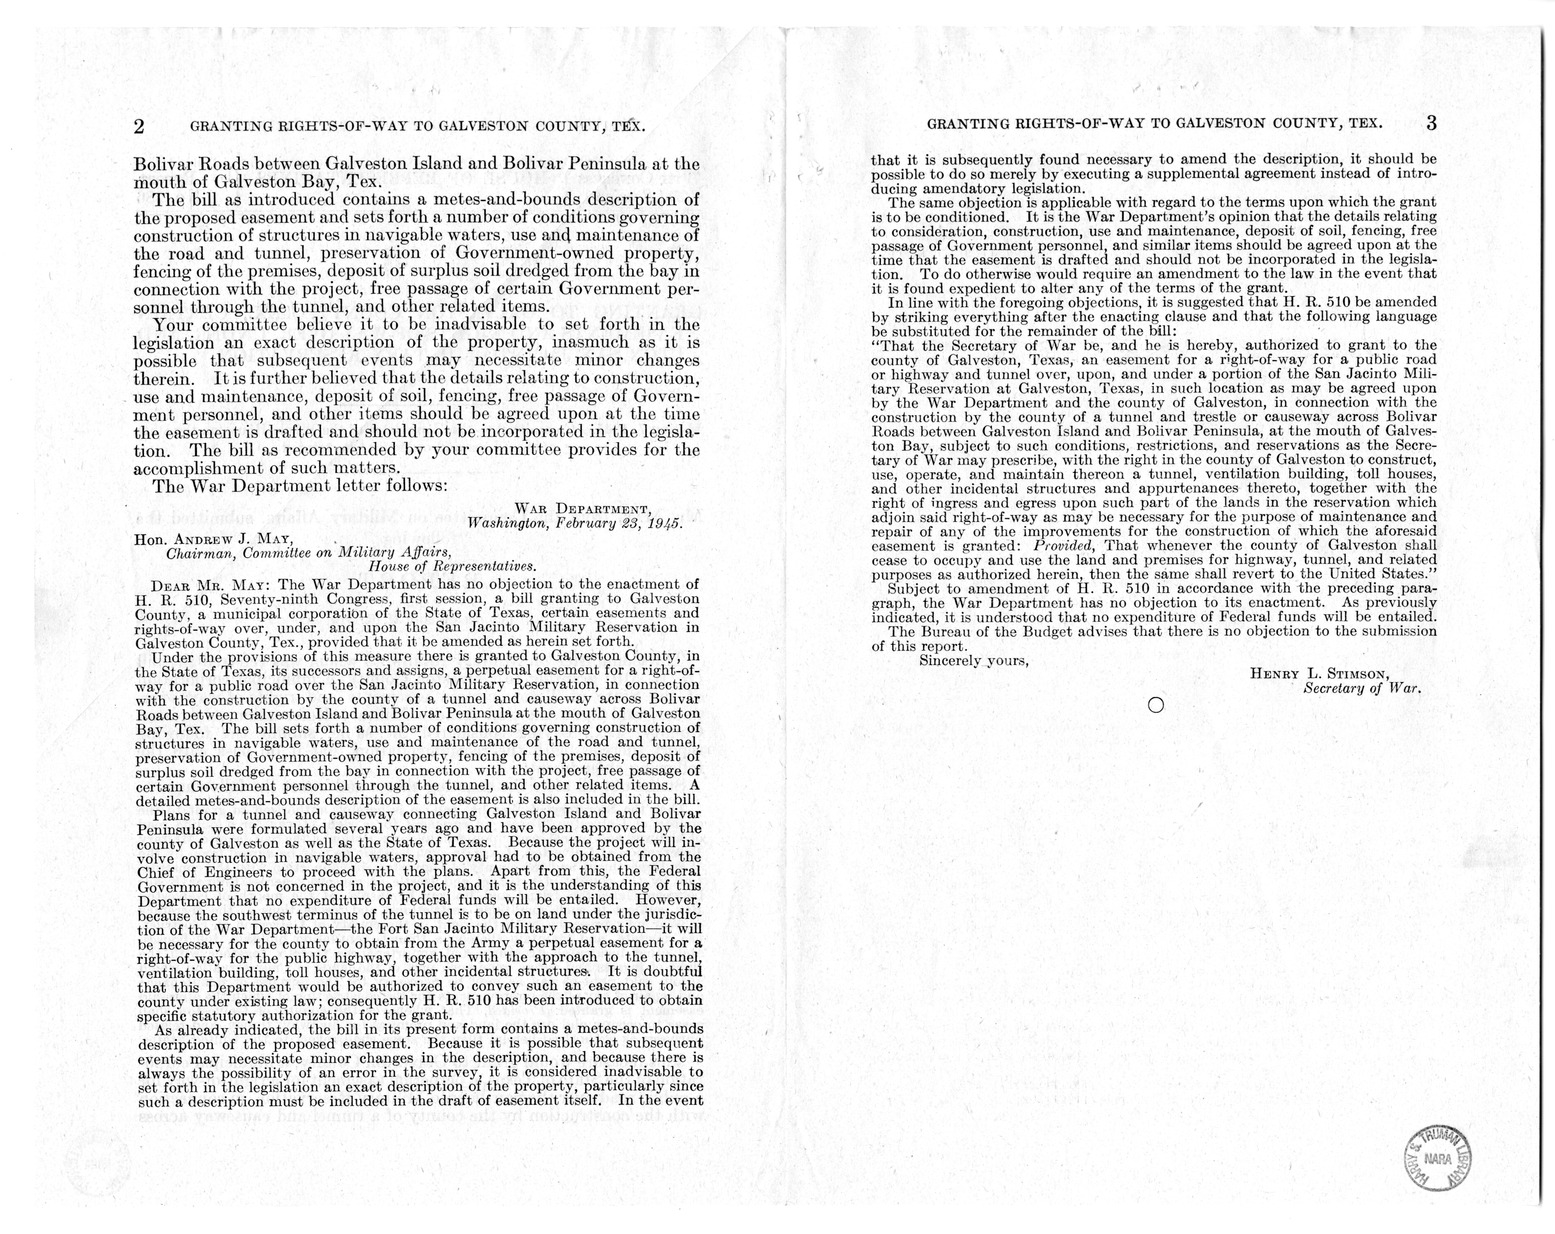 Memorandum from Frederick J. Bailey to M. C. Latta, H. R. 510, Granting to Galveston County, Texas, Certain Easements and Rights-of-way Upon the San Jancinto Military Reservation, with Attachments